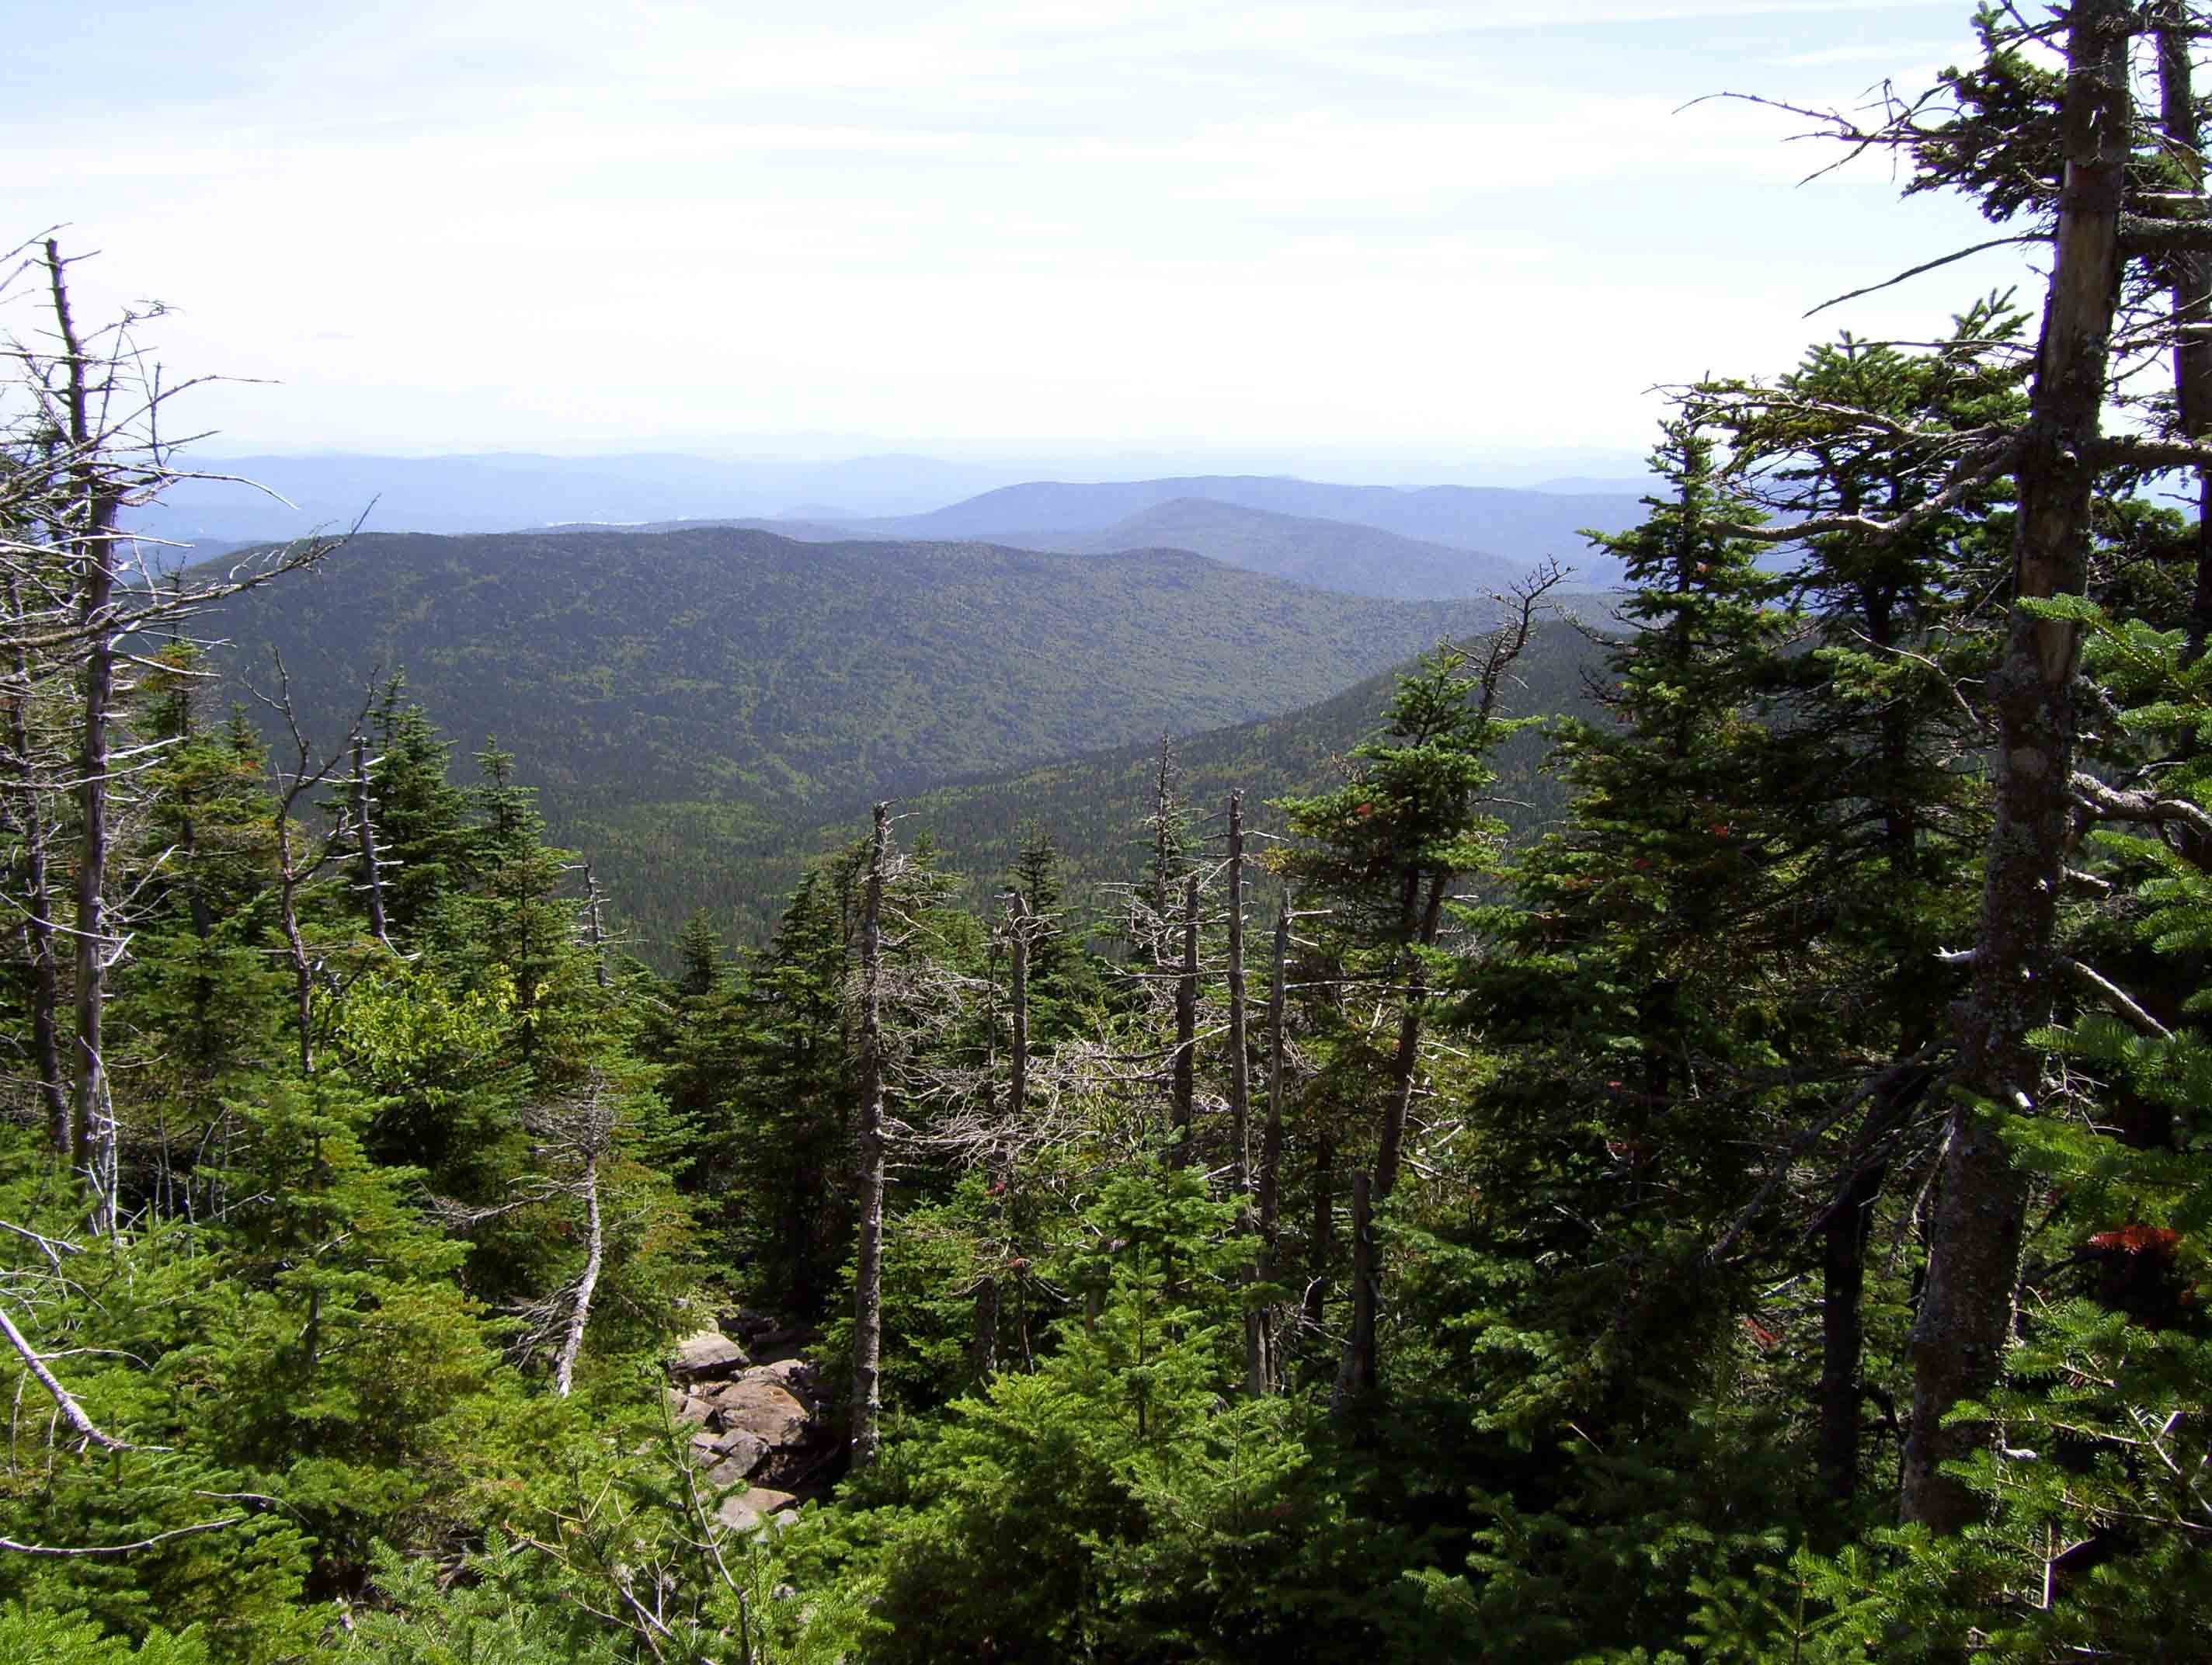 View to the east as the southbound AT climbs a steep rocky stretch to reach a point near the summit of Mt. Blue, a subsidiary peak on Mt. Moosilauke. Taken from approx. Mile 2.6.  Courtesy dlcul@conncoll.edu